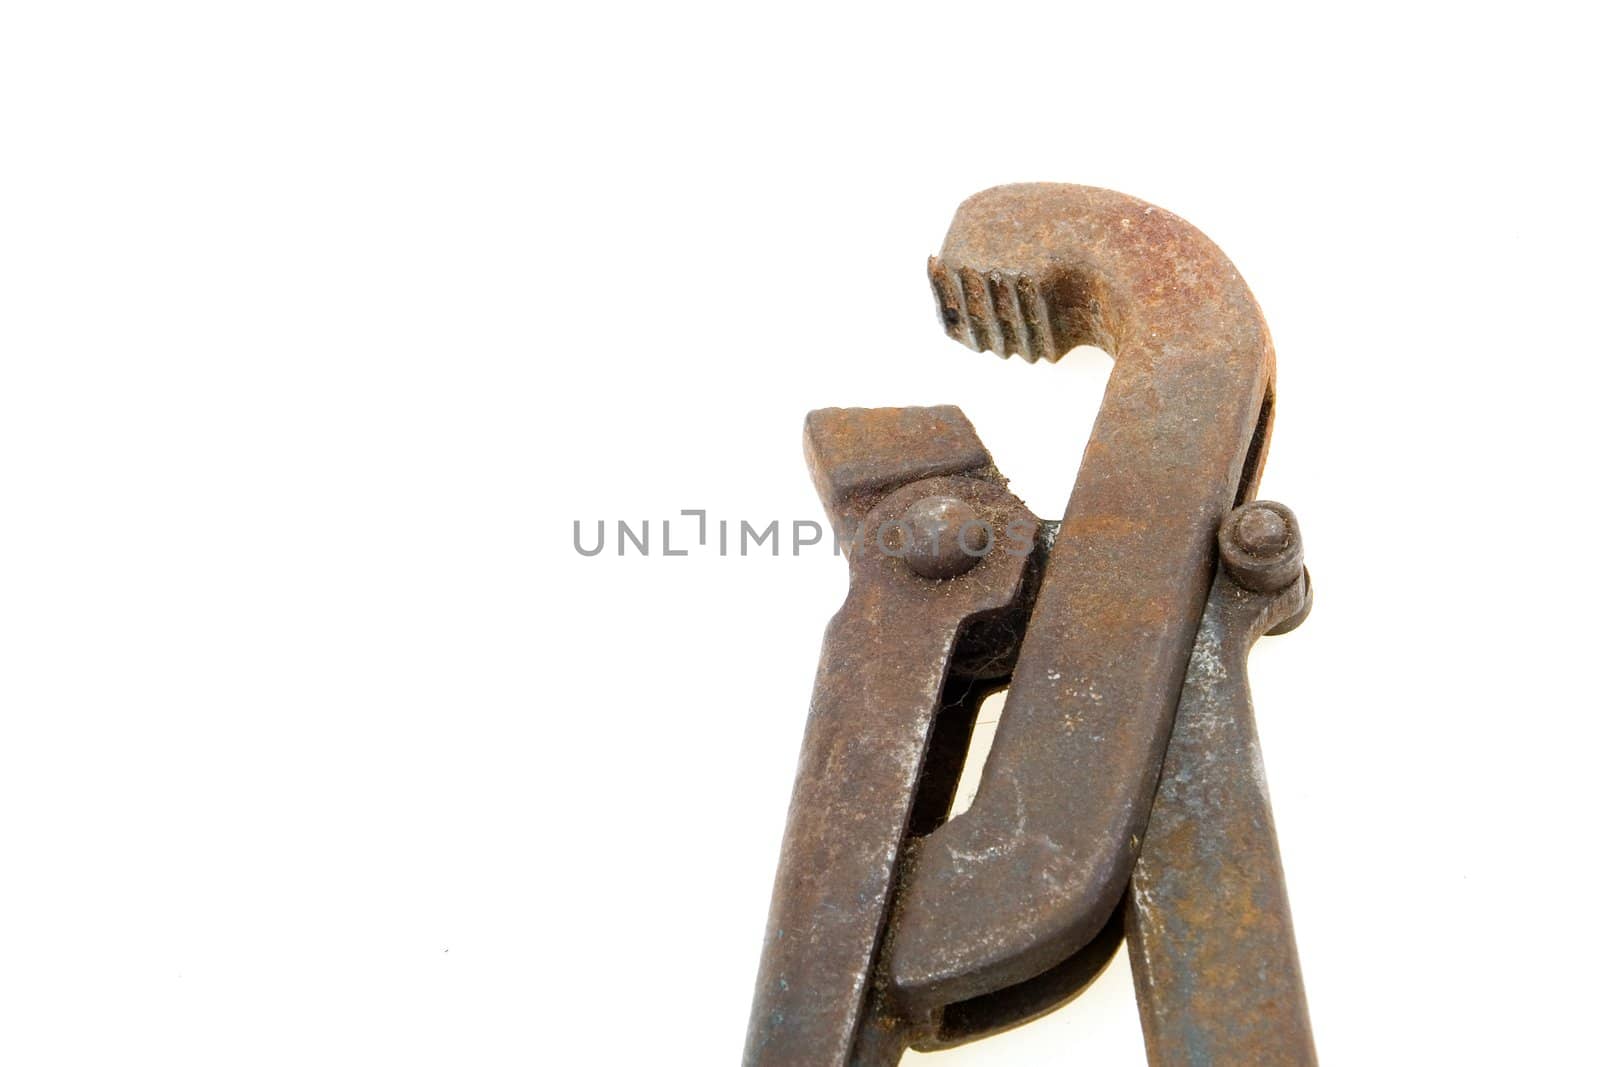 Big used rusty wrench on white background.